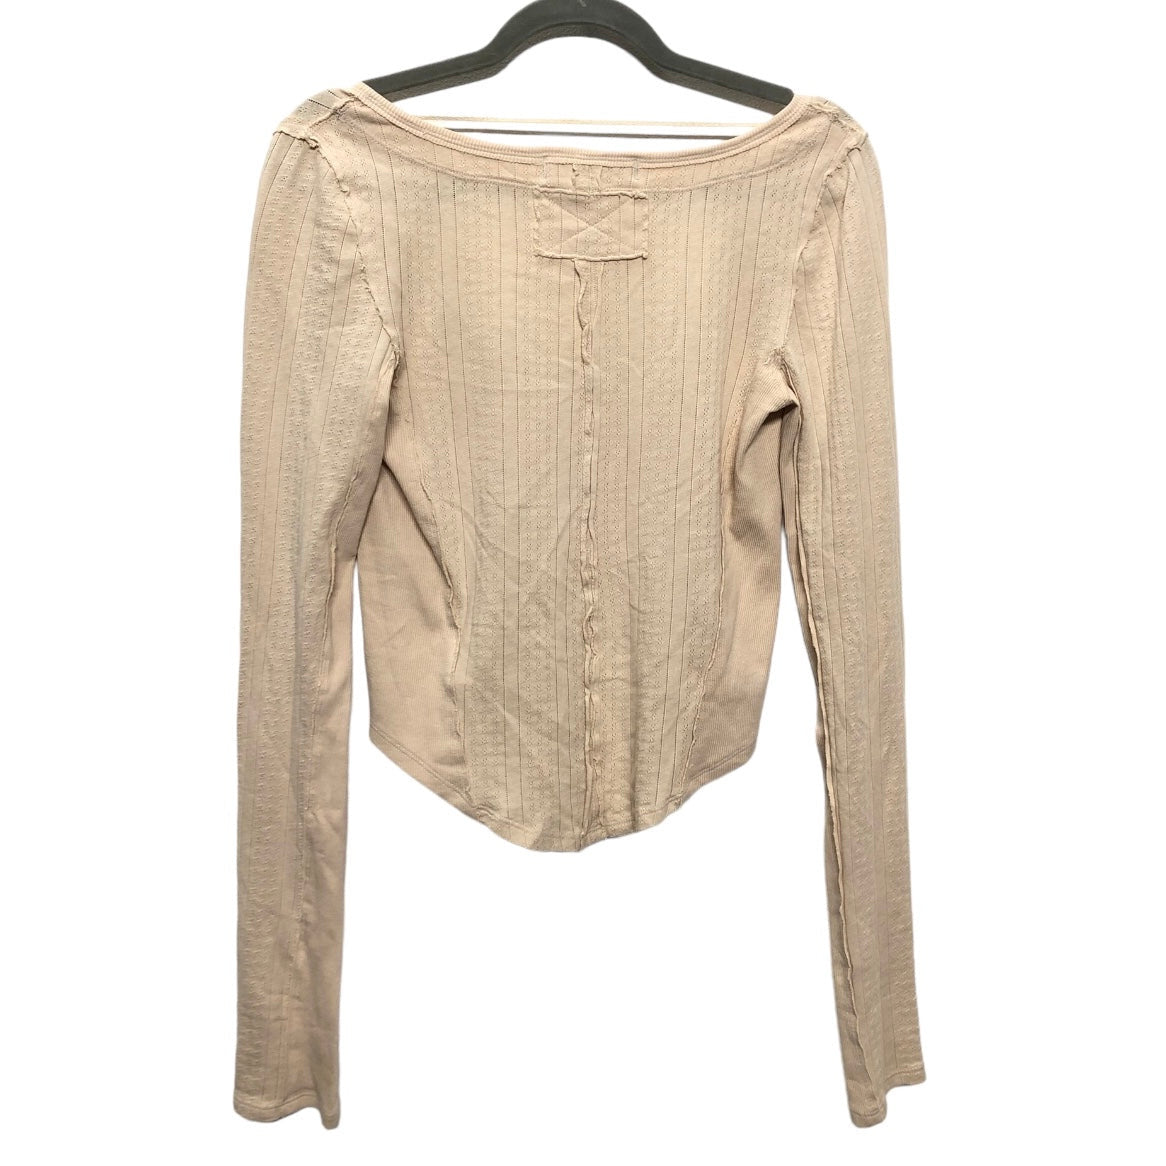 Beige Top Long Sleeve We The Free, Size M